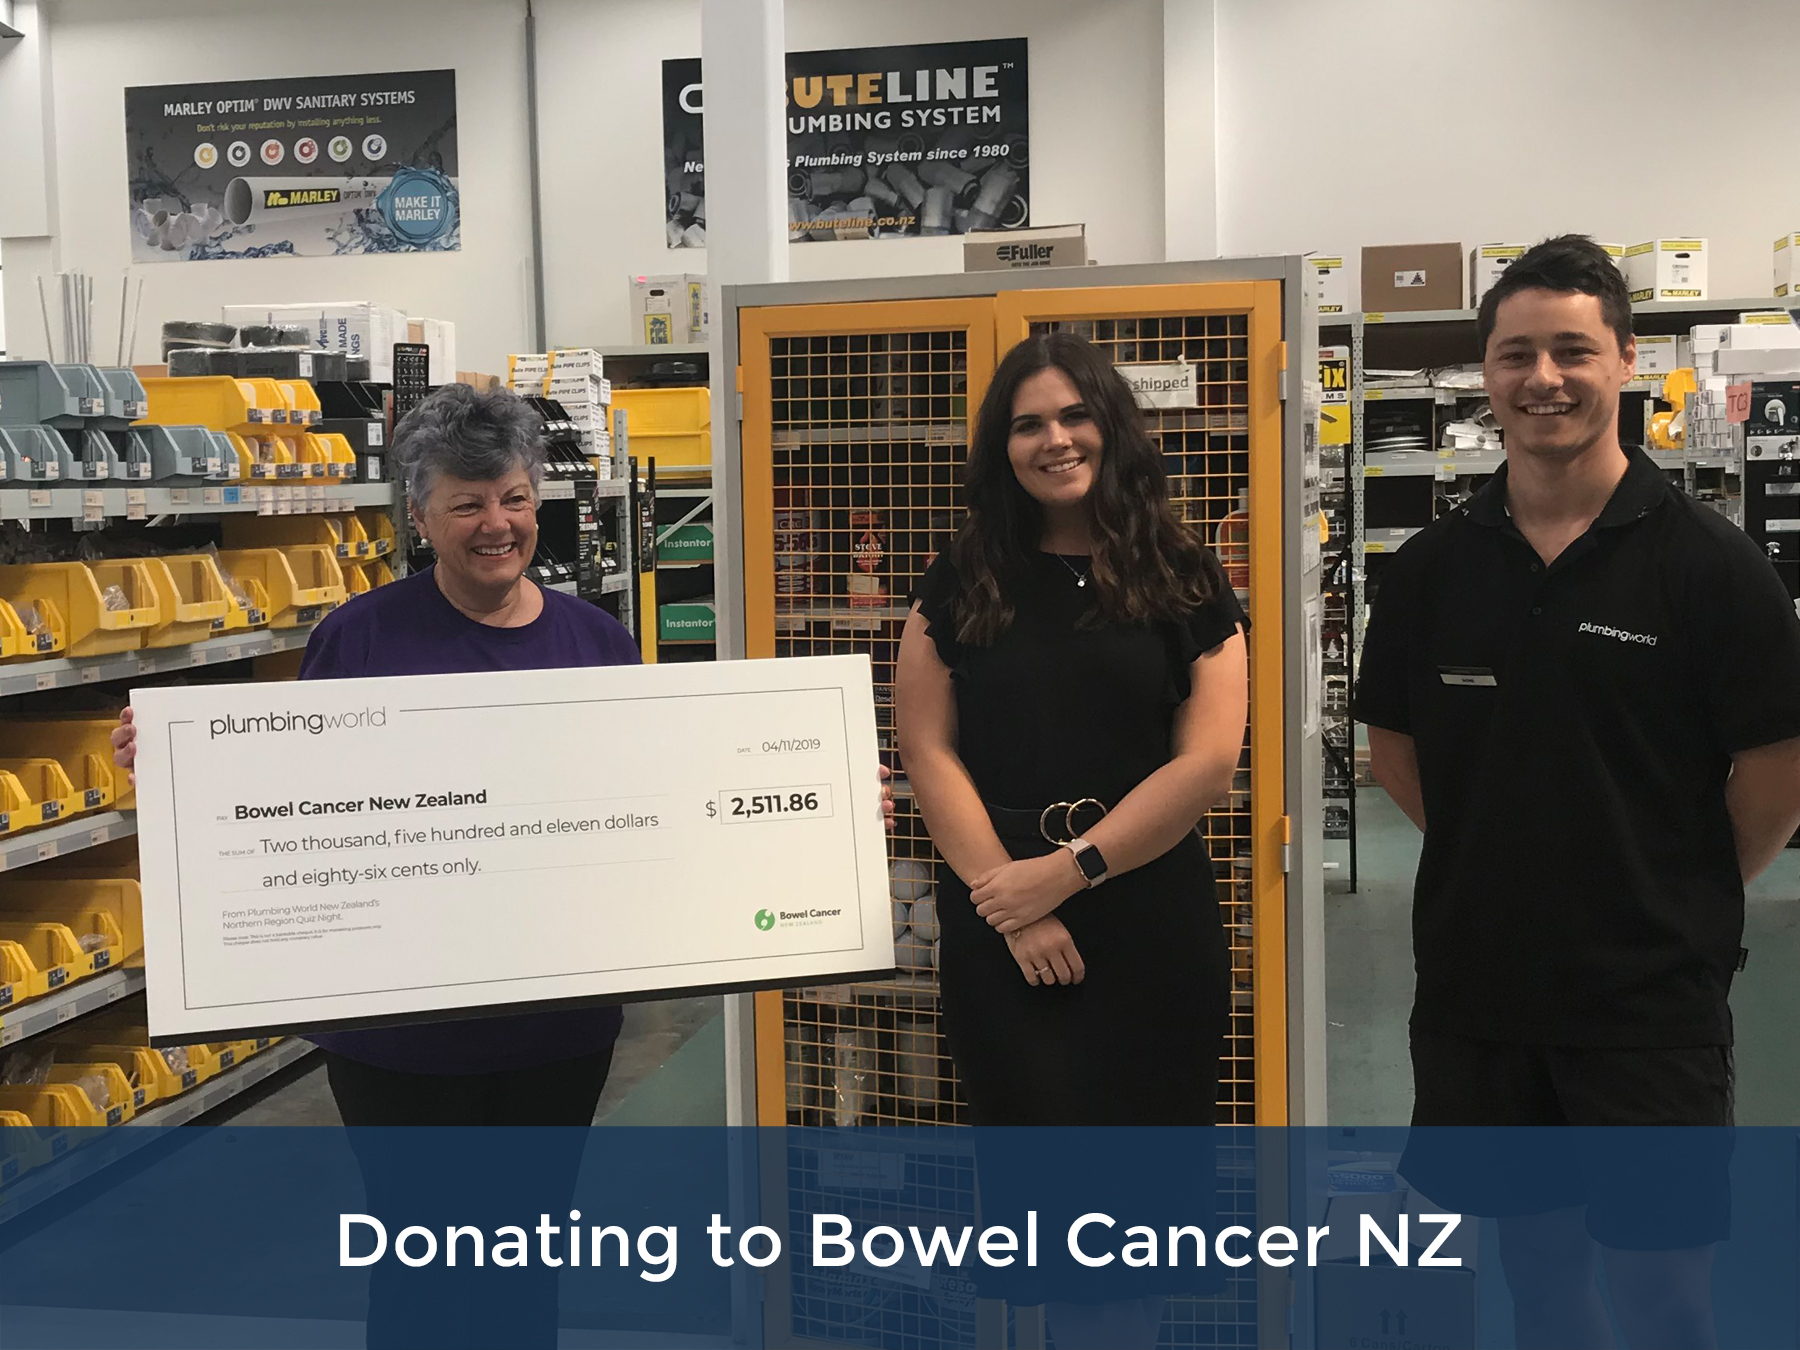 Donating to Bowel Cancer NZ